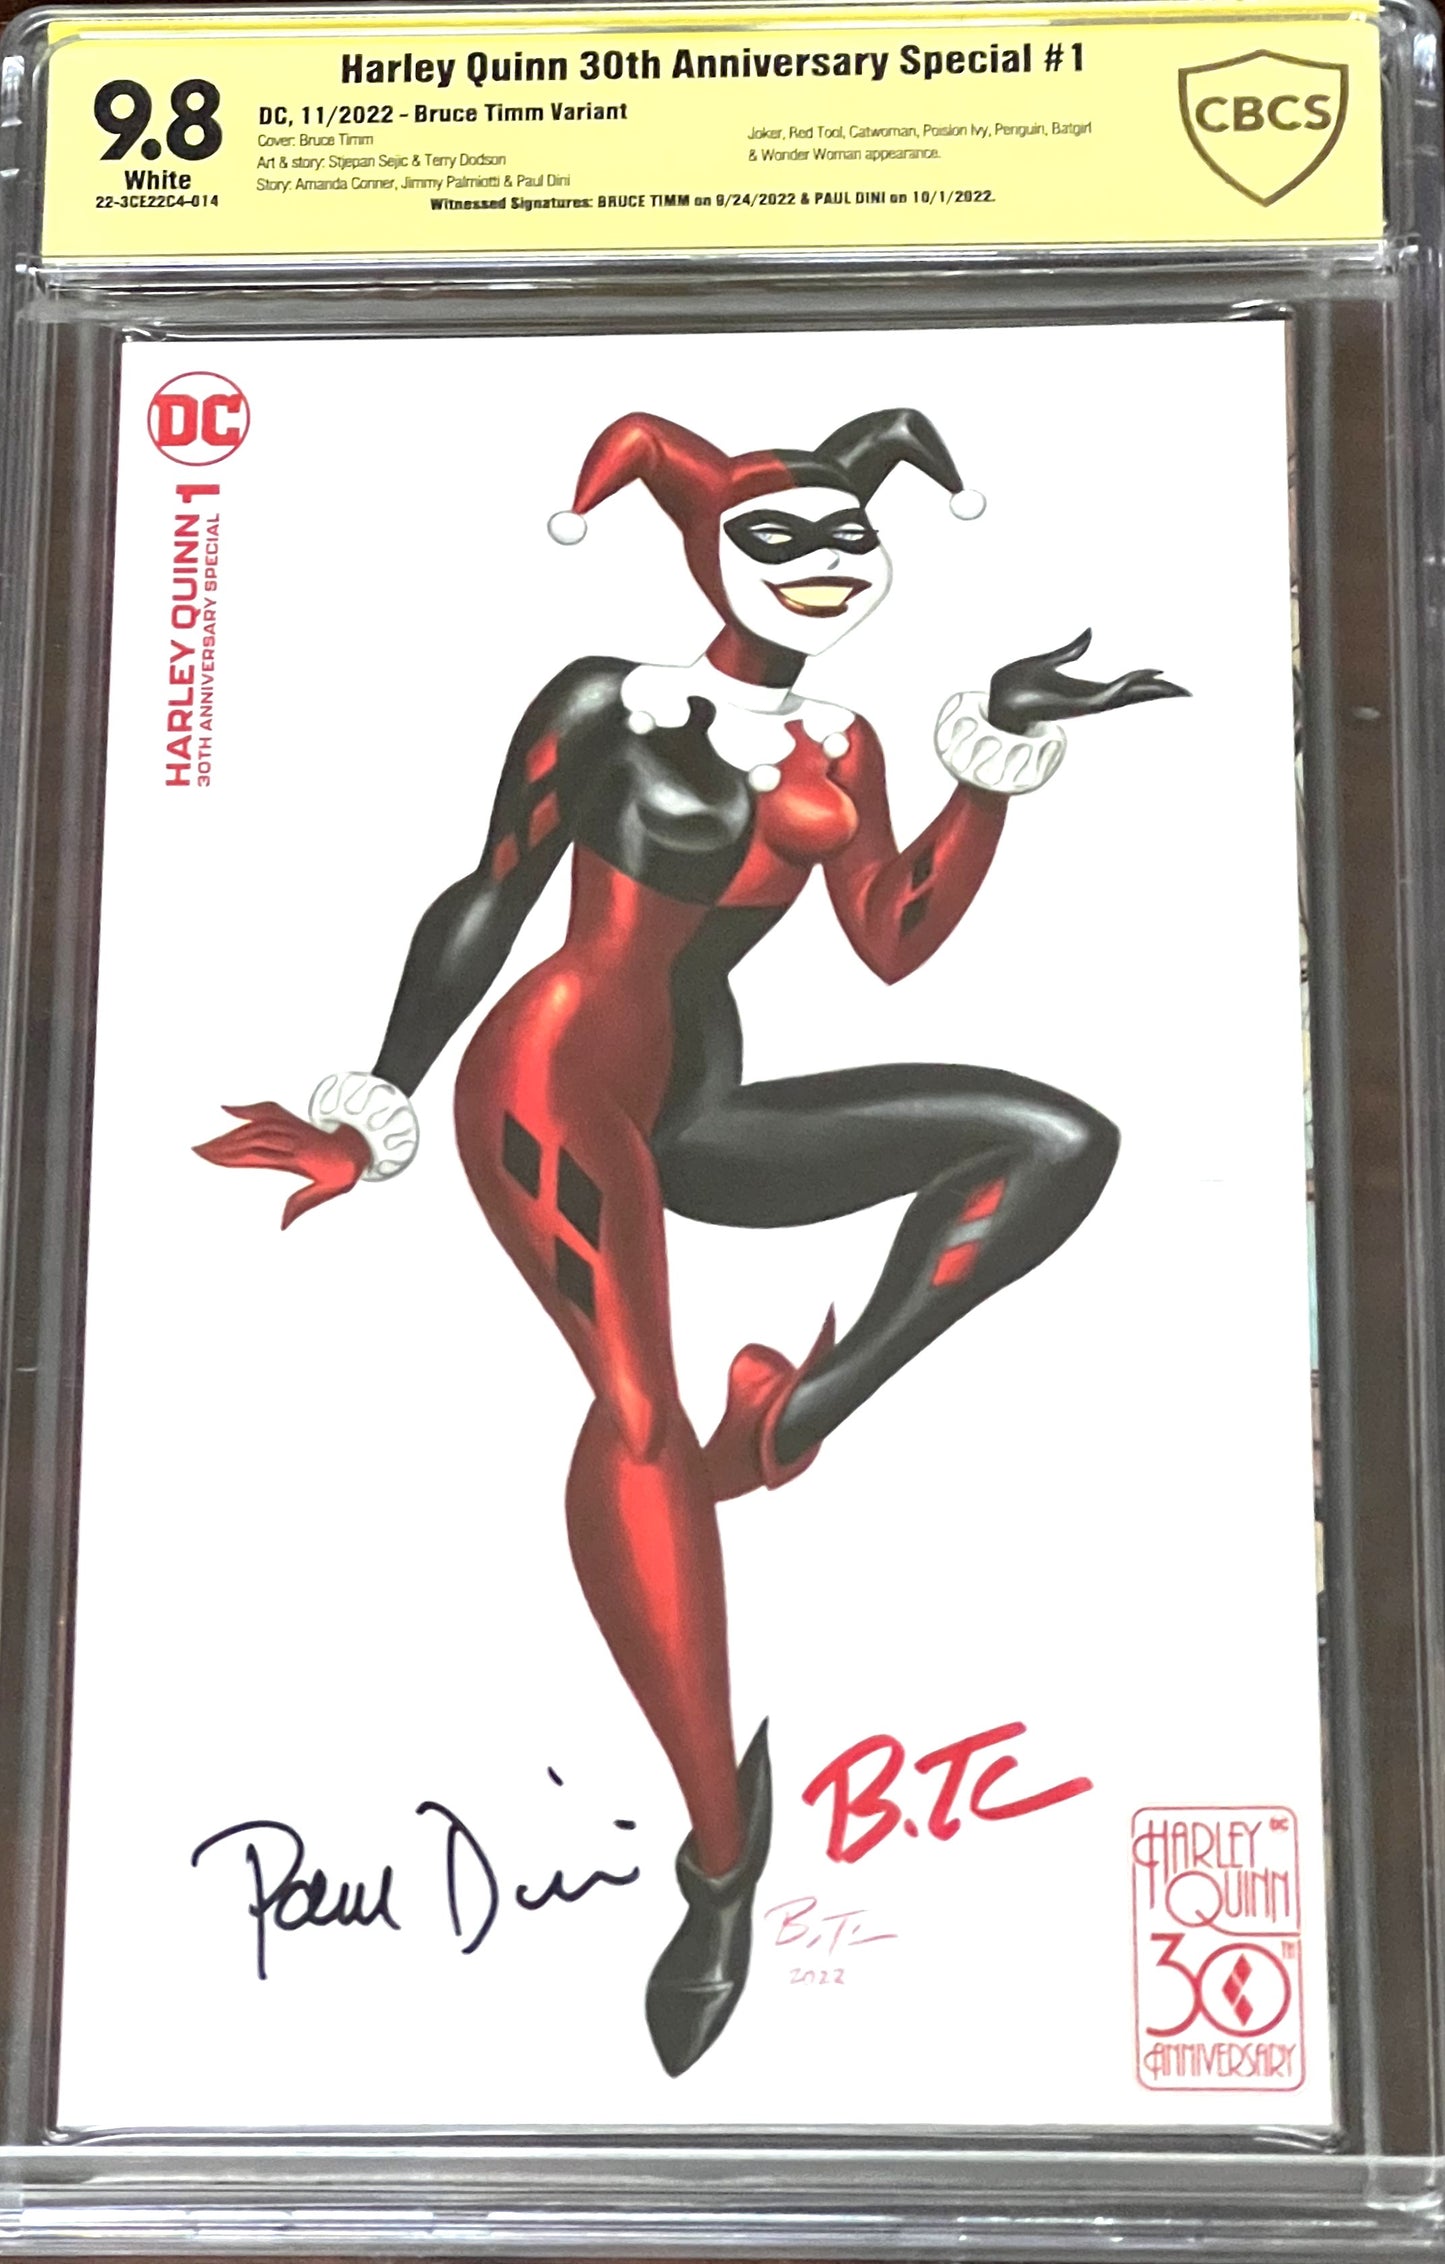 Harley Quinn 30th Anniversary Special #1 - Bruce Timm Variant.